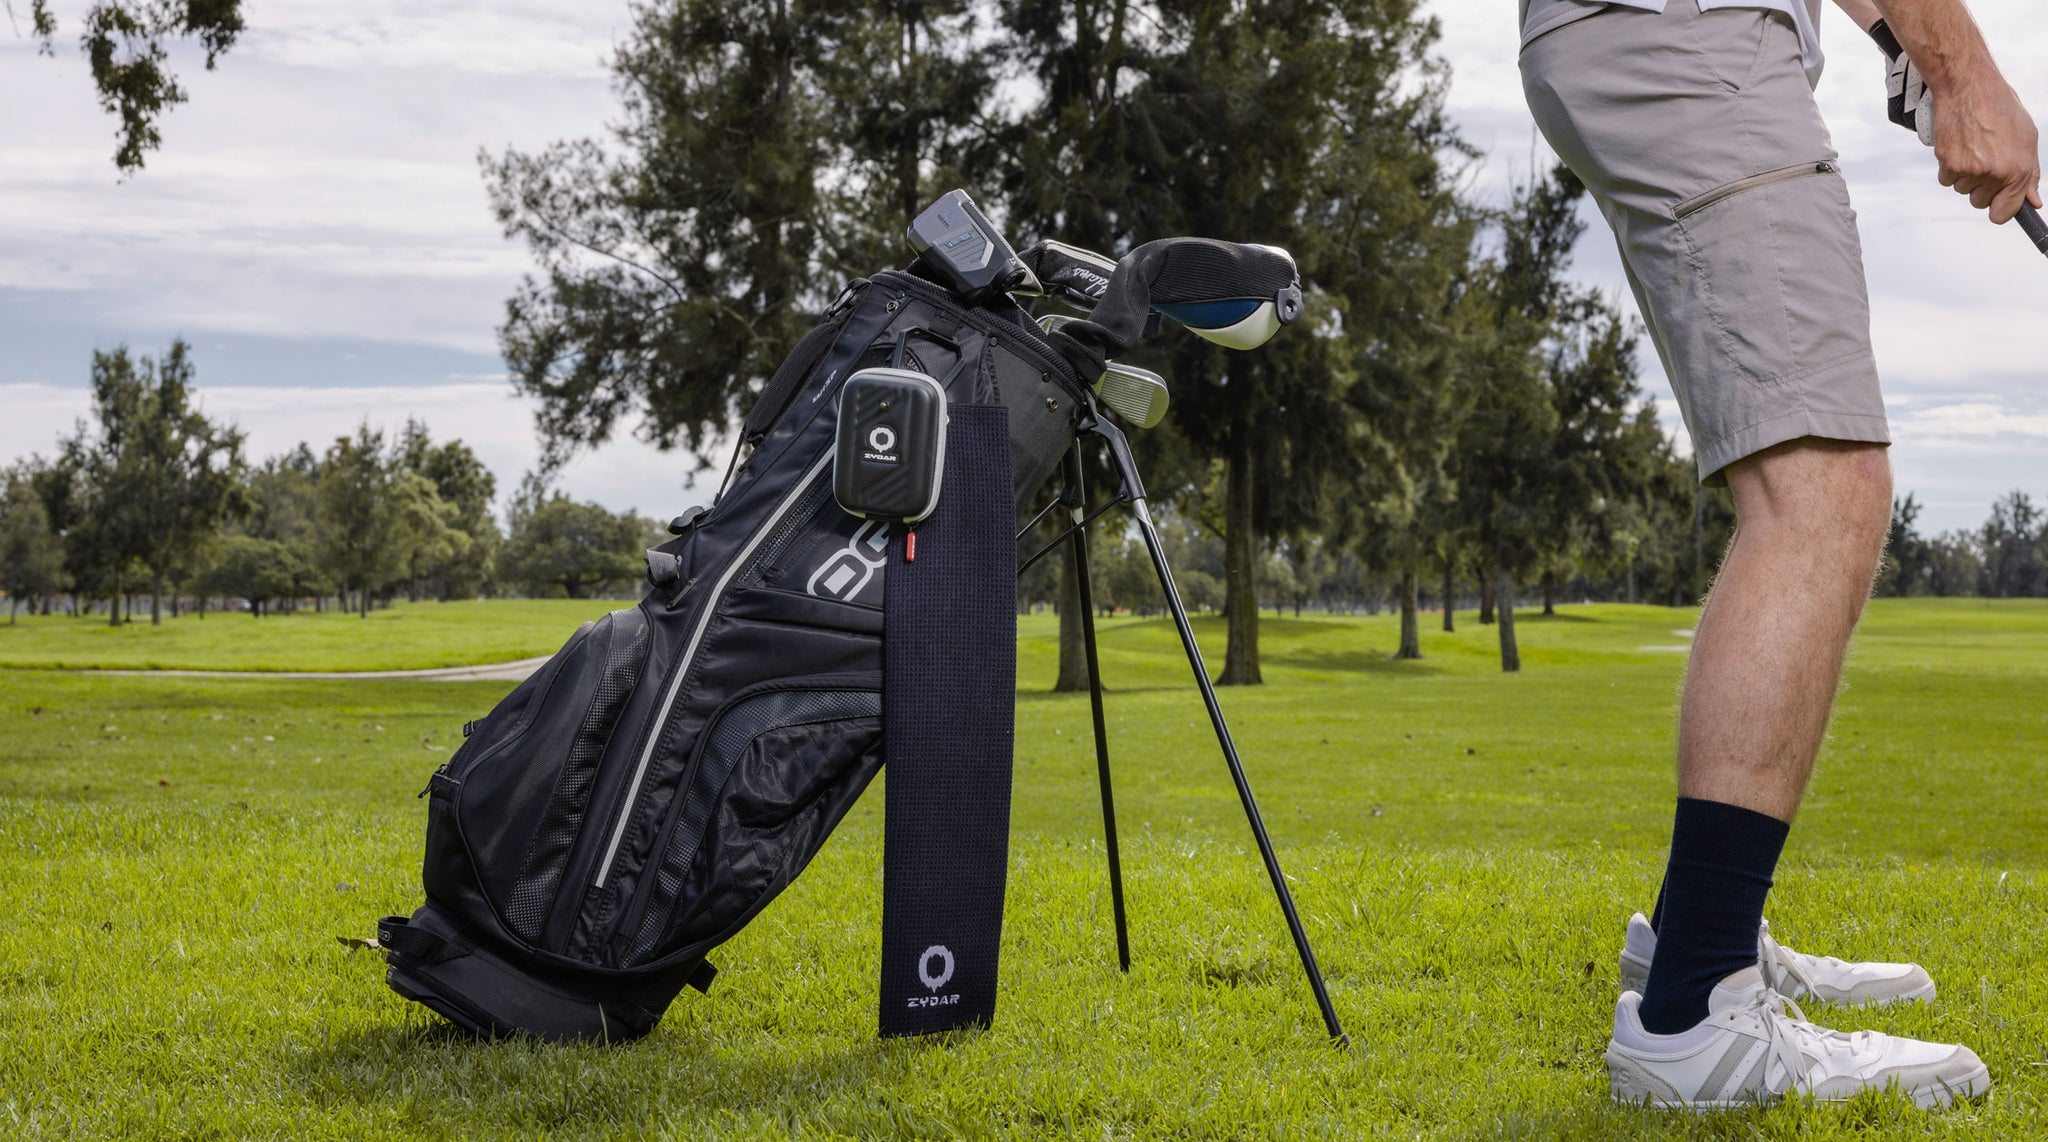 How Many Strokes Can a ZYDAR Golf Rangefinder Help You Lose?